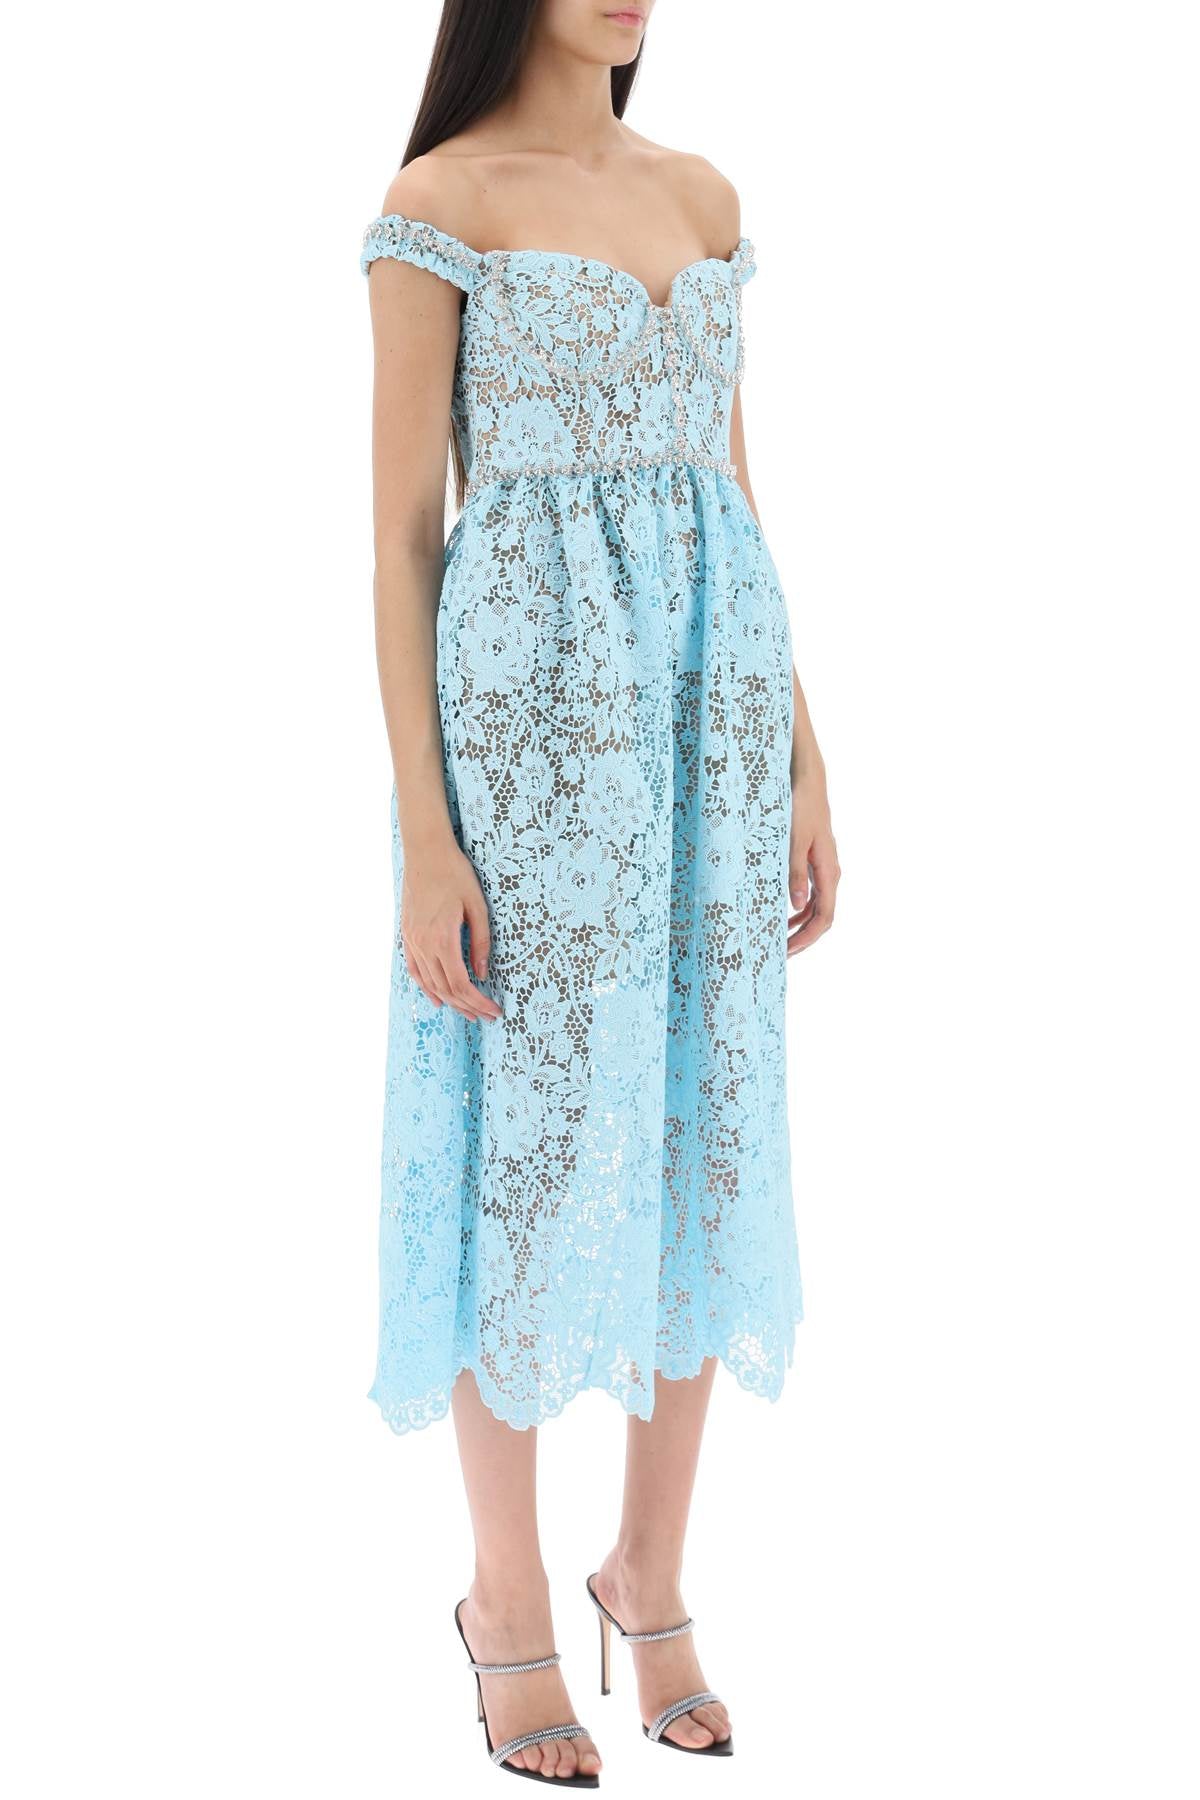 Self Portrait Self portrait midi dress in floral lace with crystals